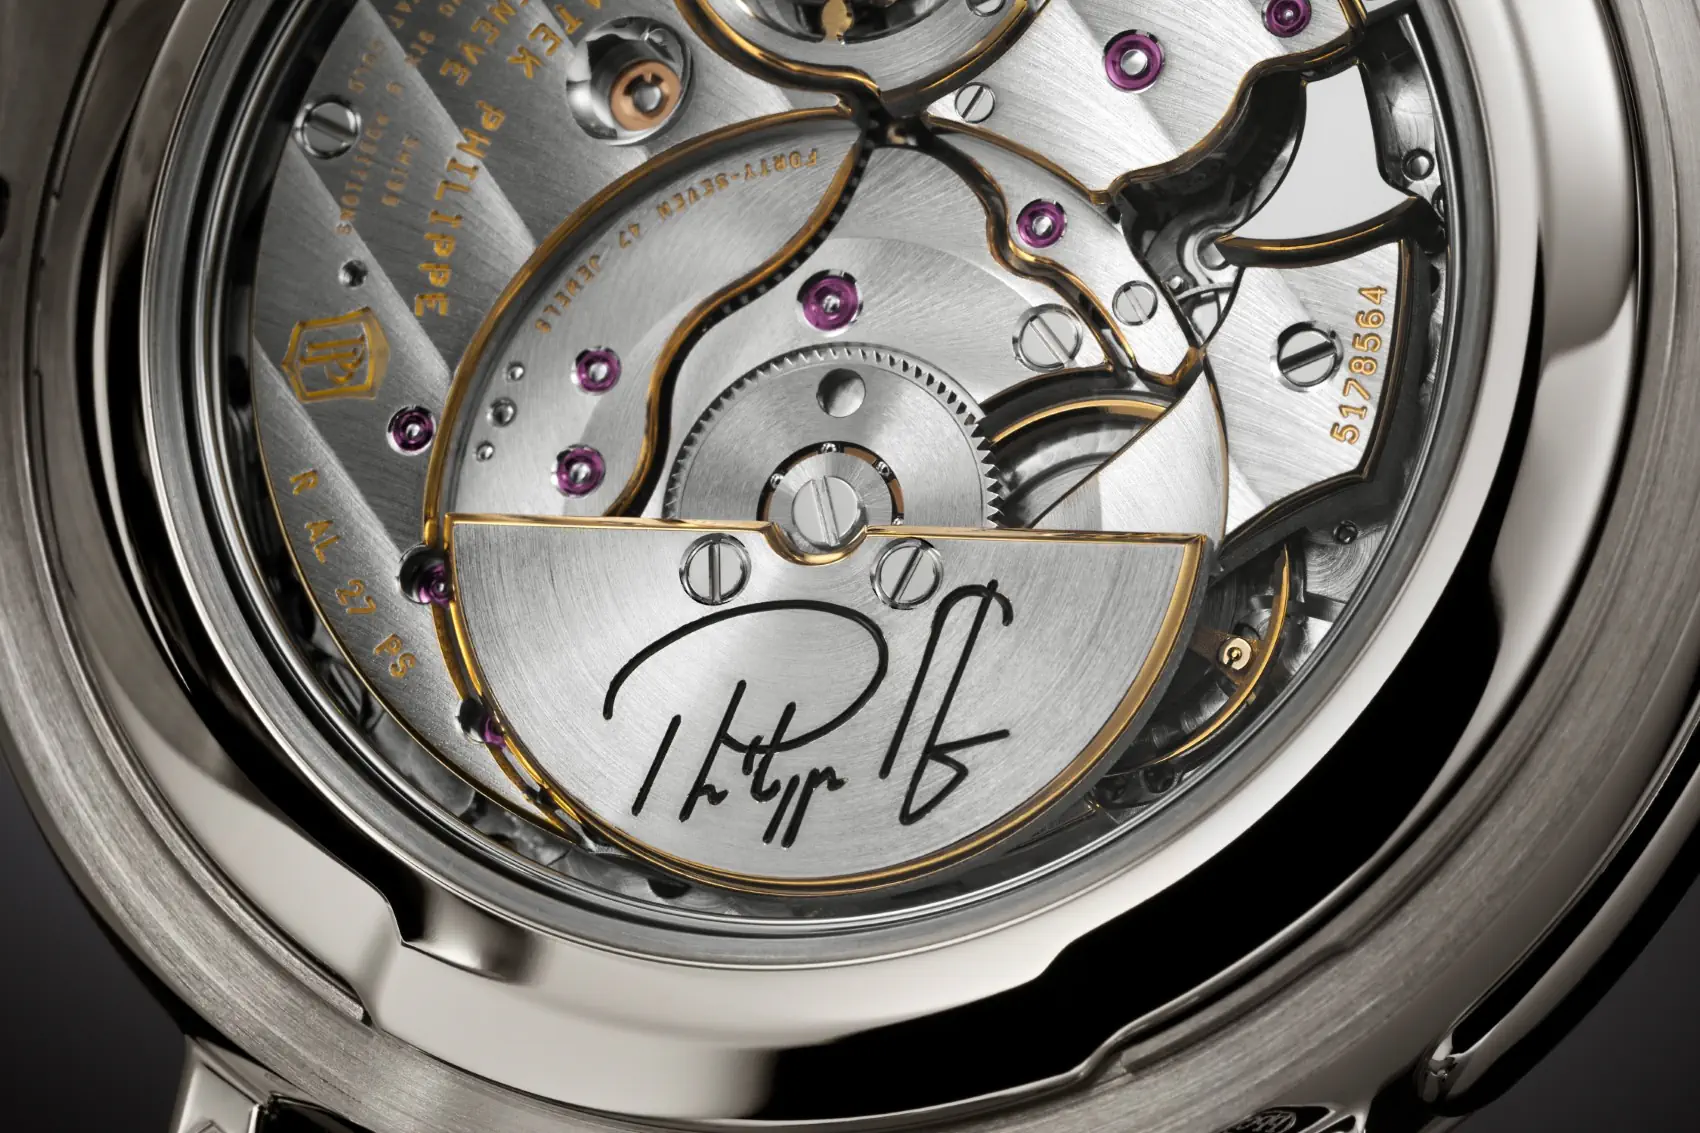 Philippe Stern's Legacy Embodied in Patek Philippe's New Minute Repeater Alarm Ref. 1938P